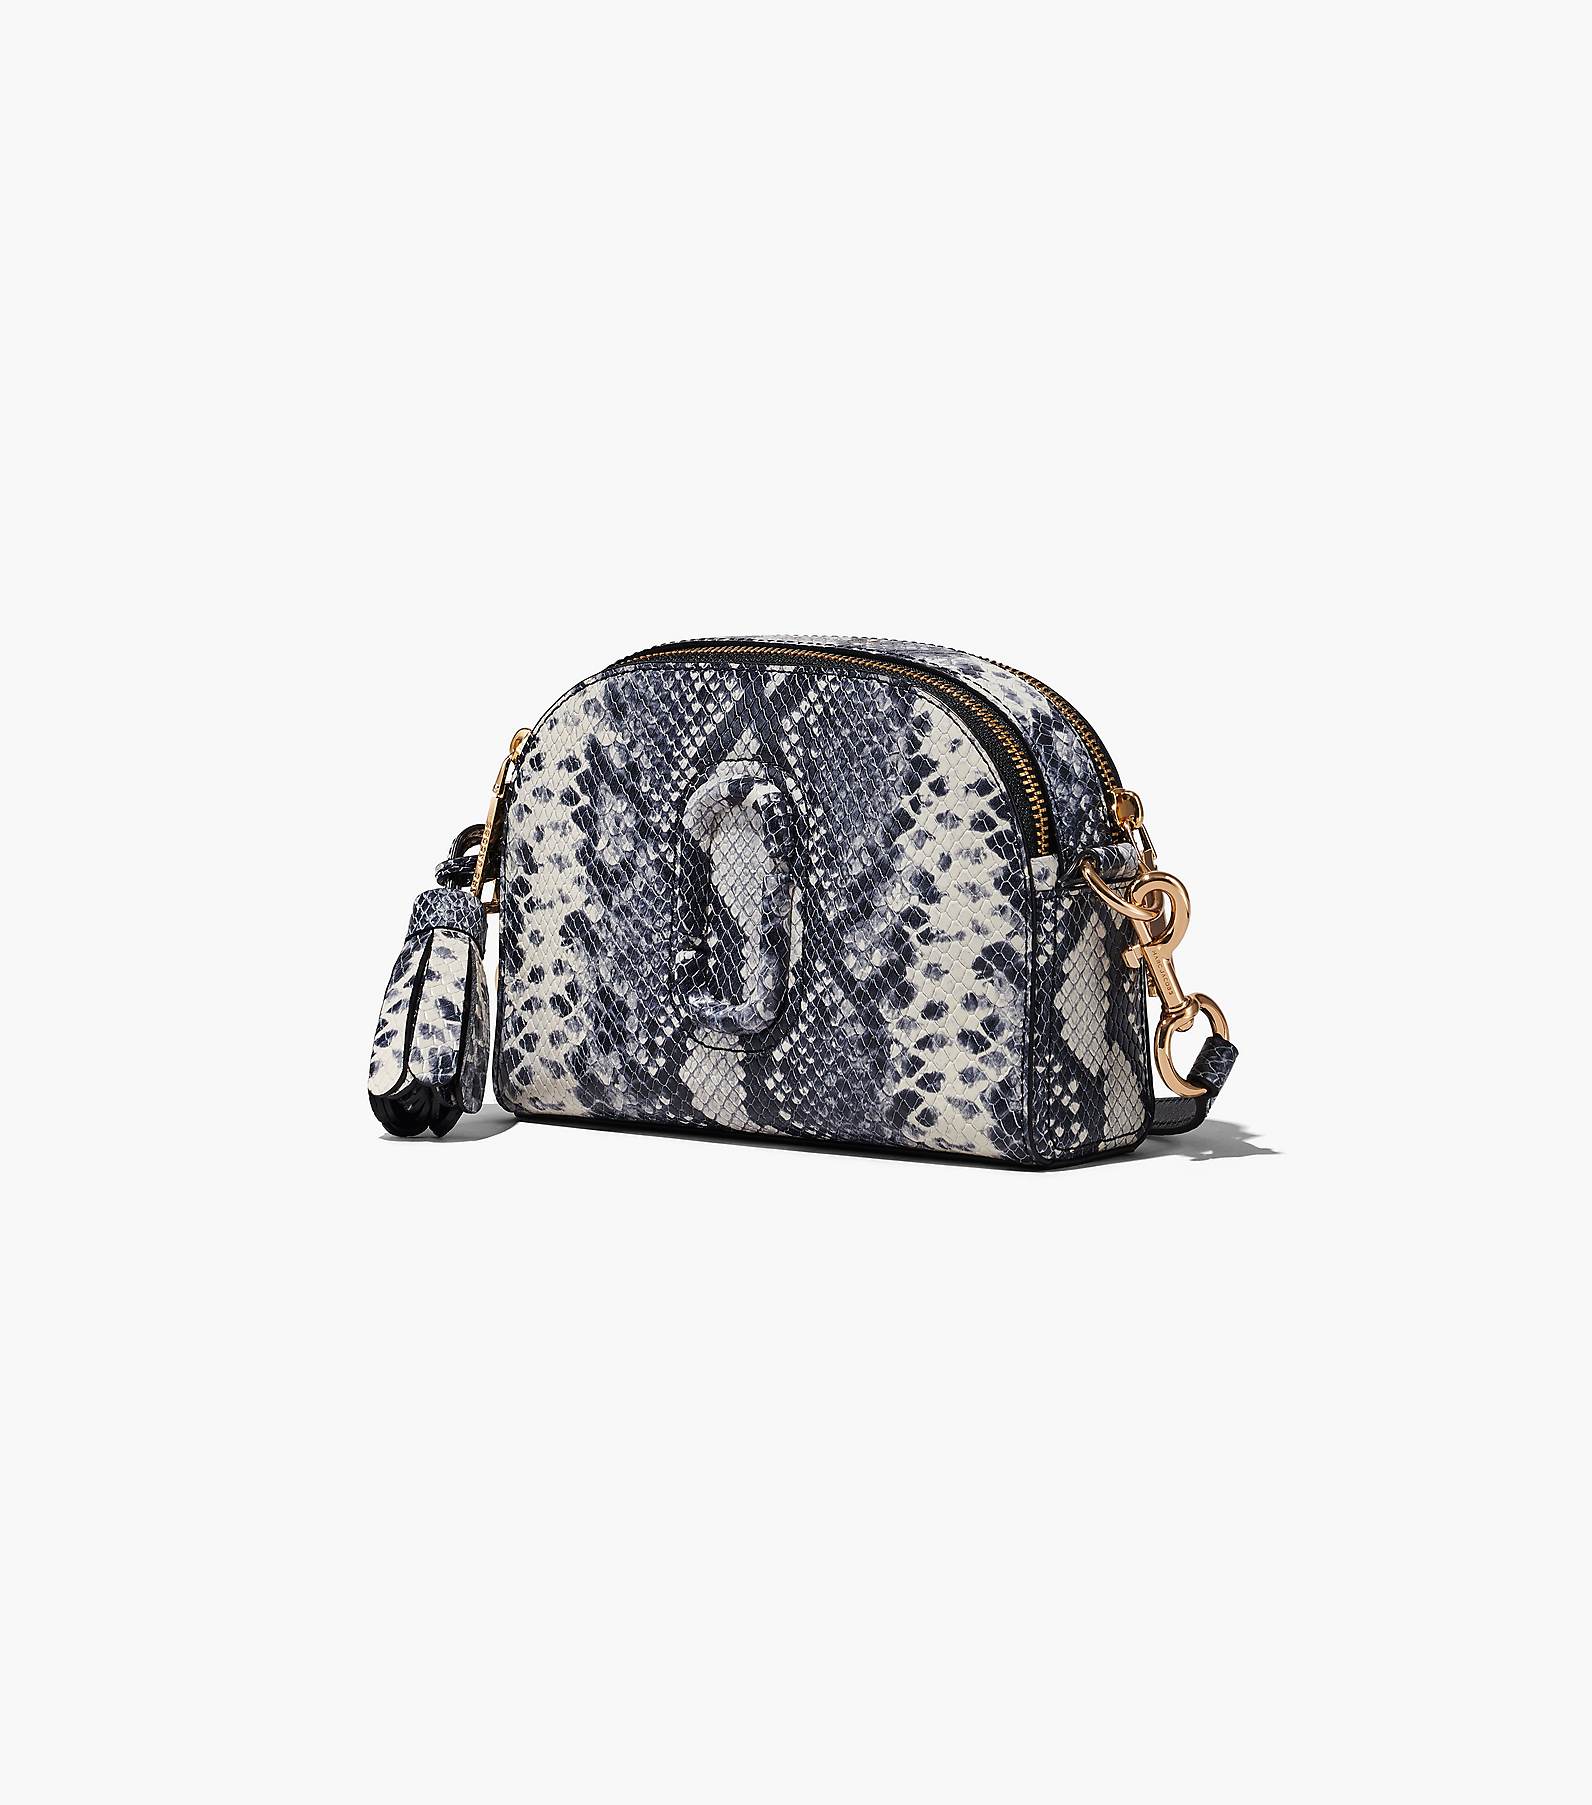 The Python-Embossed Shutter | Marc Jacobs | Official Site